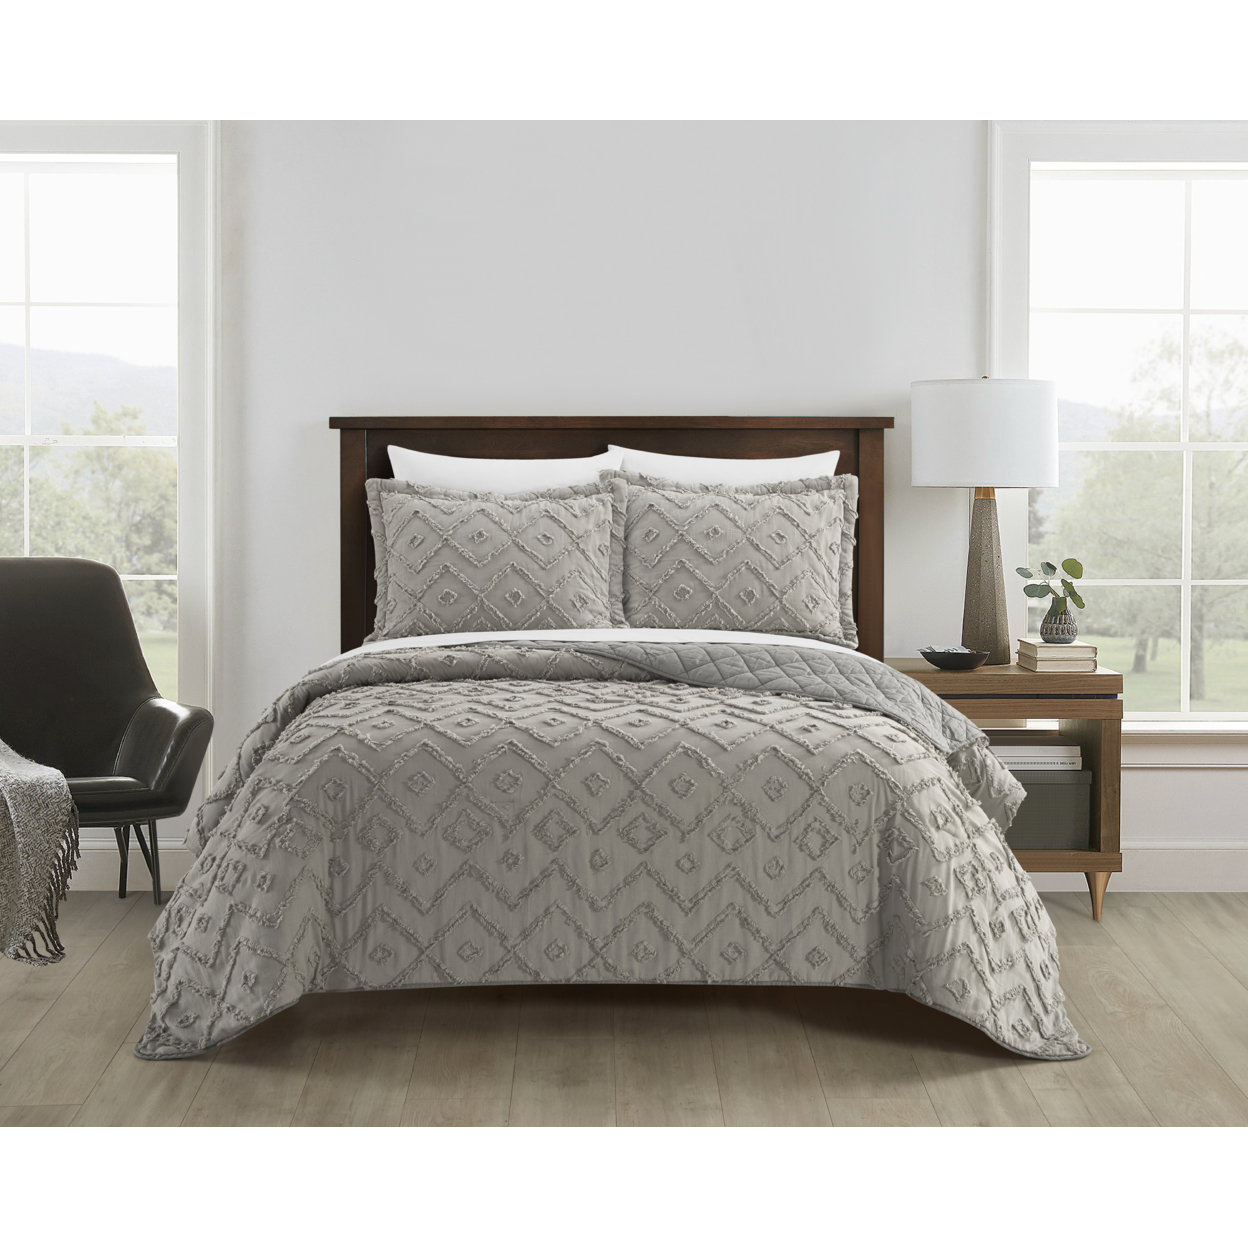 NY&C Home Dody 3 Piece Cotton Quilt Set Clip Jacquard Geometric Pattern Bedding - Grey, Queen